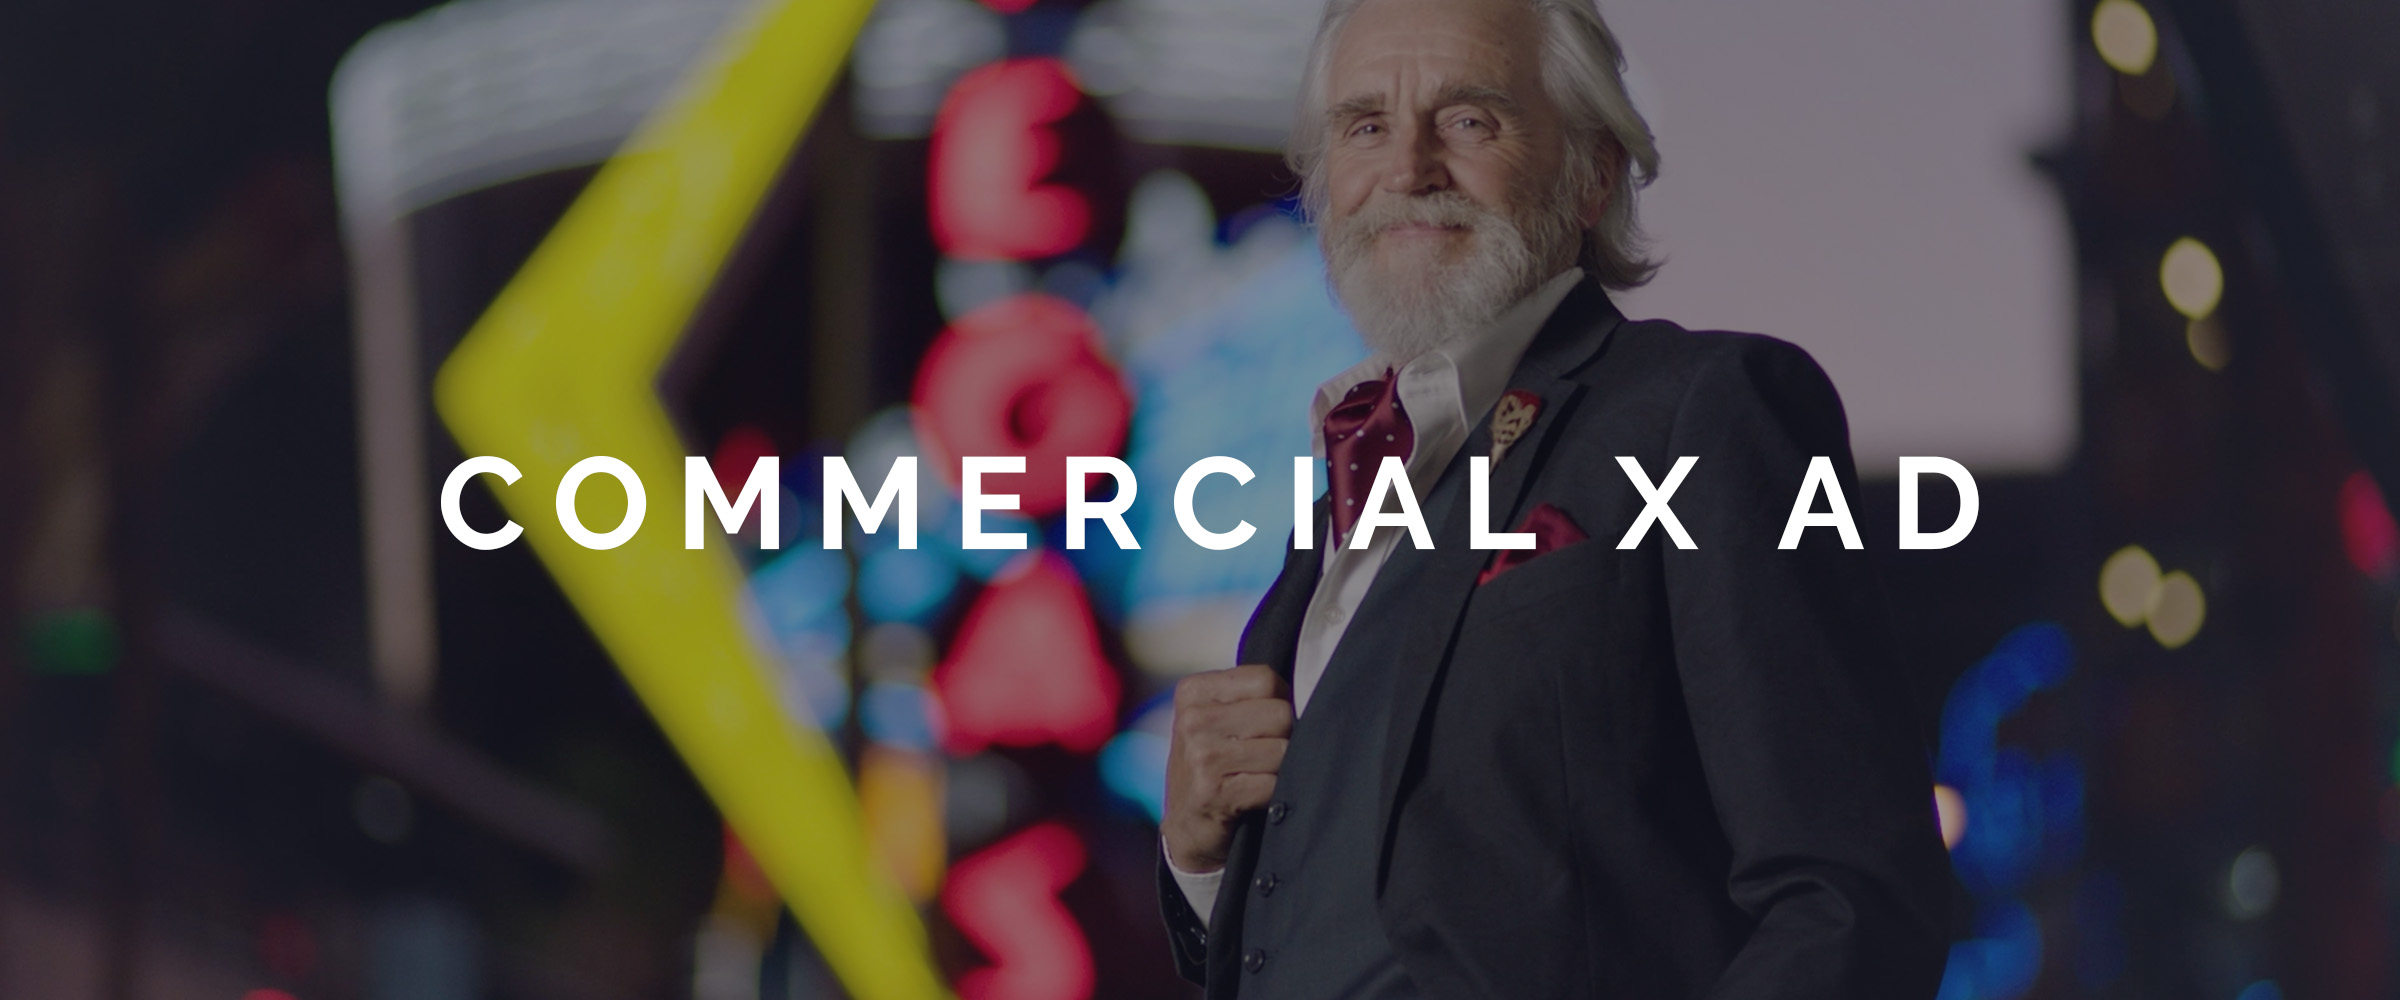 COMMERCIAL x AD